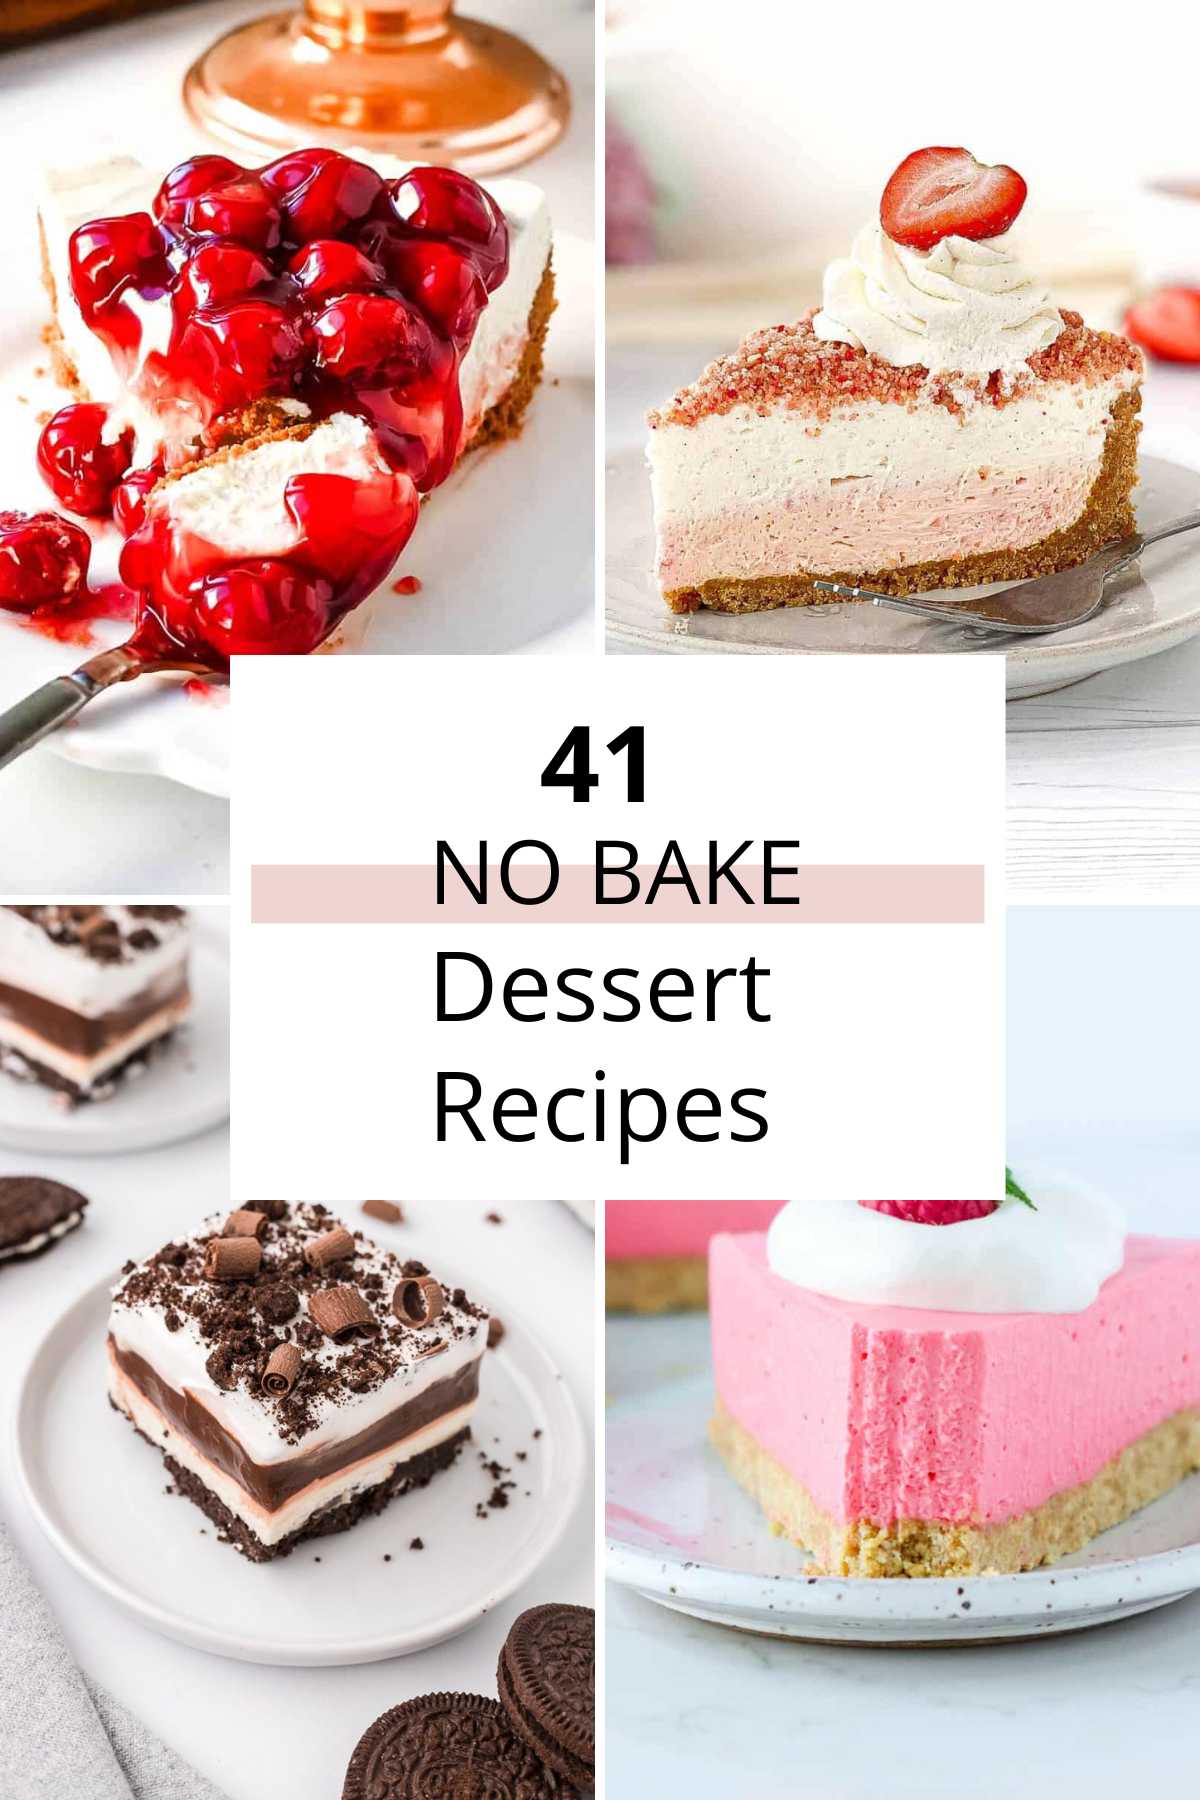 41 Quick and Easy No Bake Dessert Recipes for a Crowd